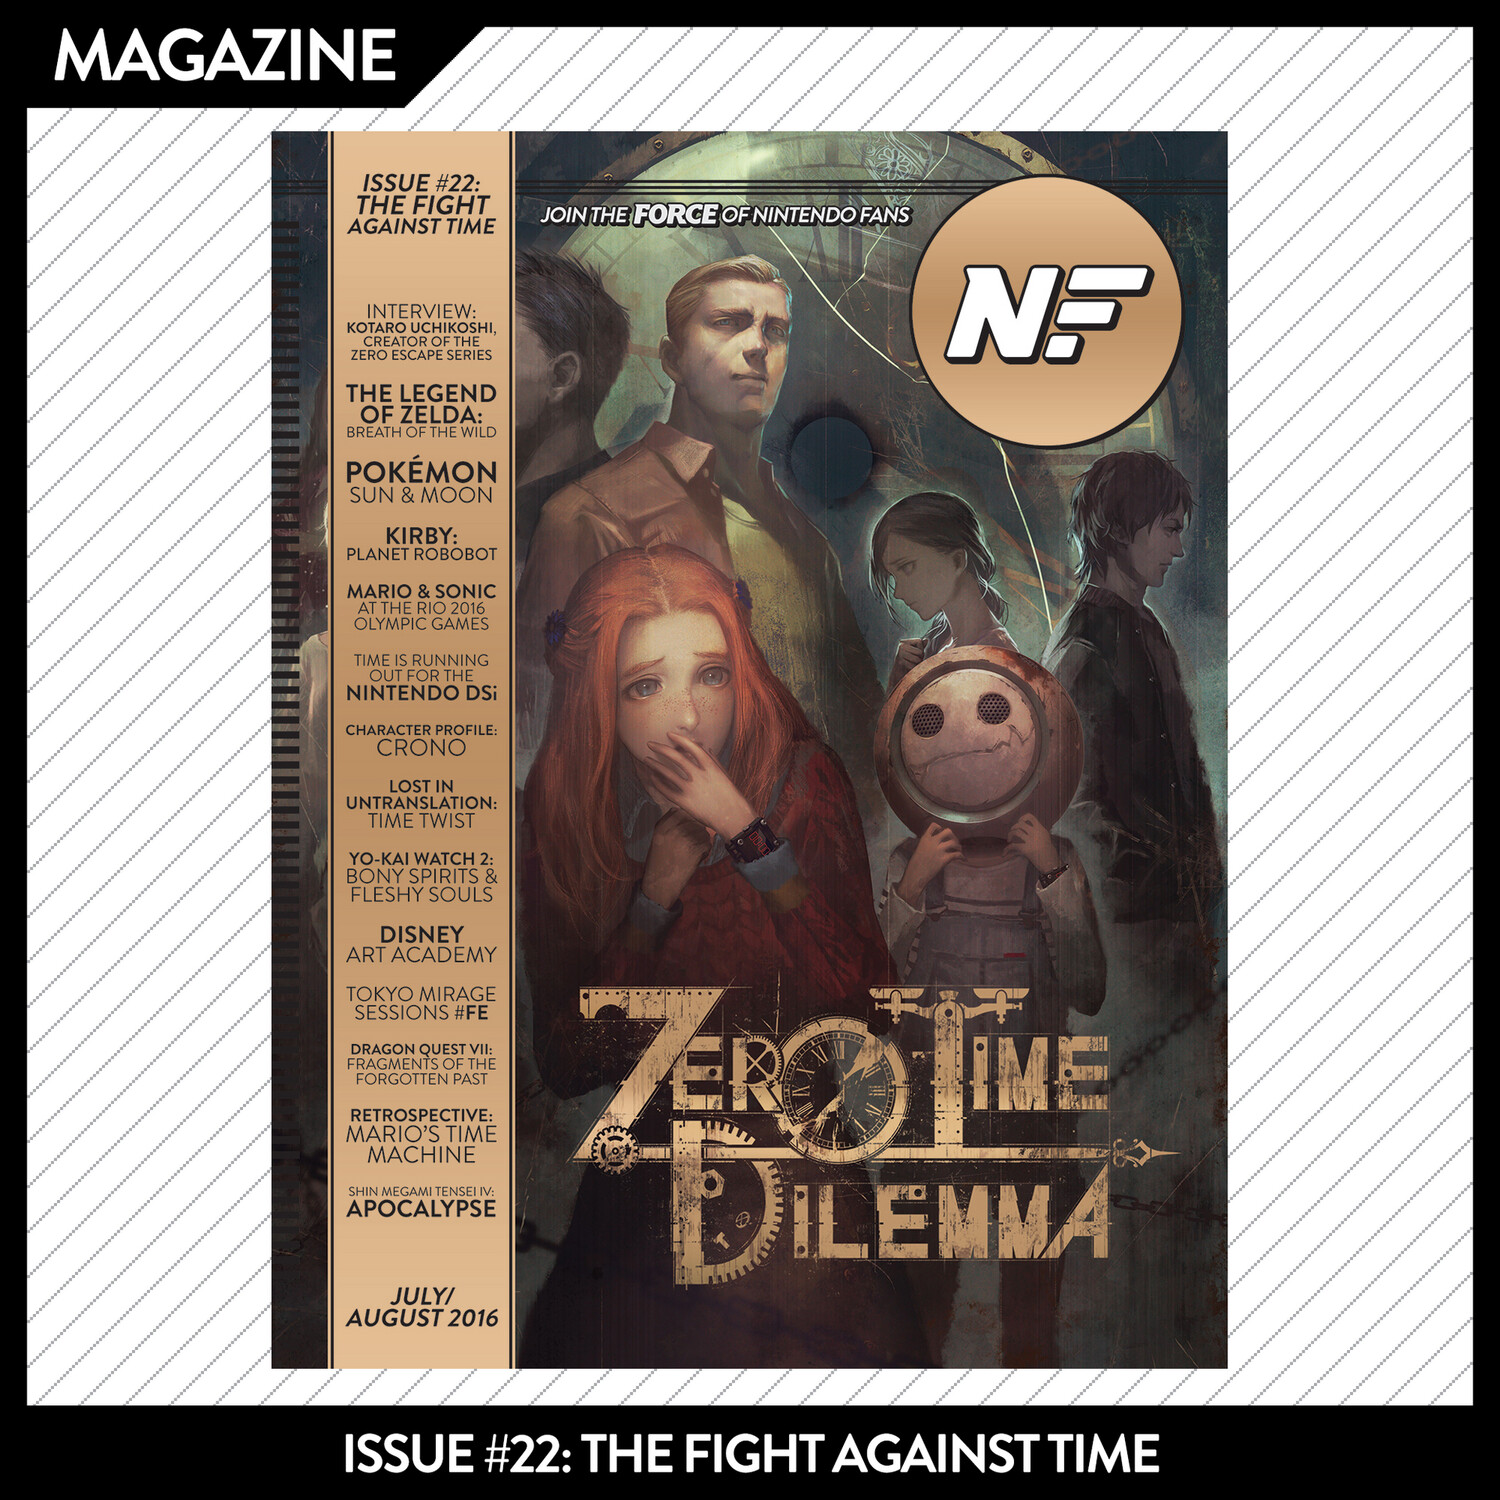 Issue #22: The Fight Against Time – July/August 2016